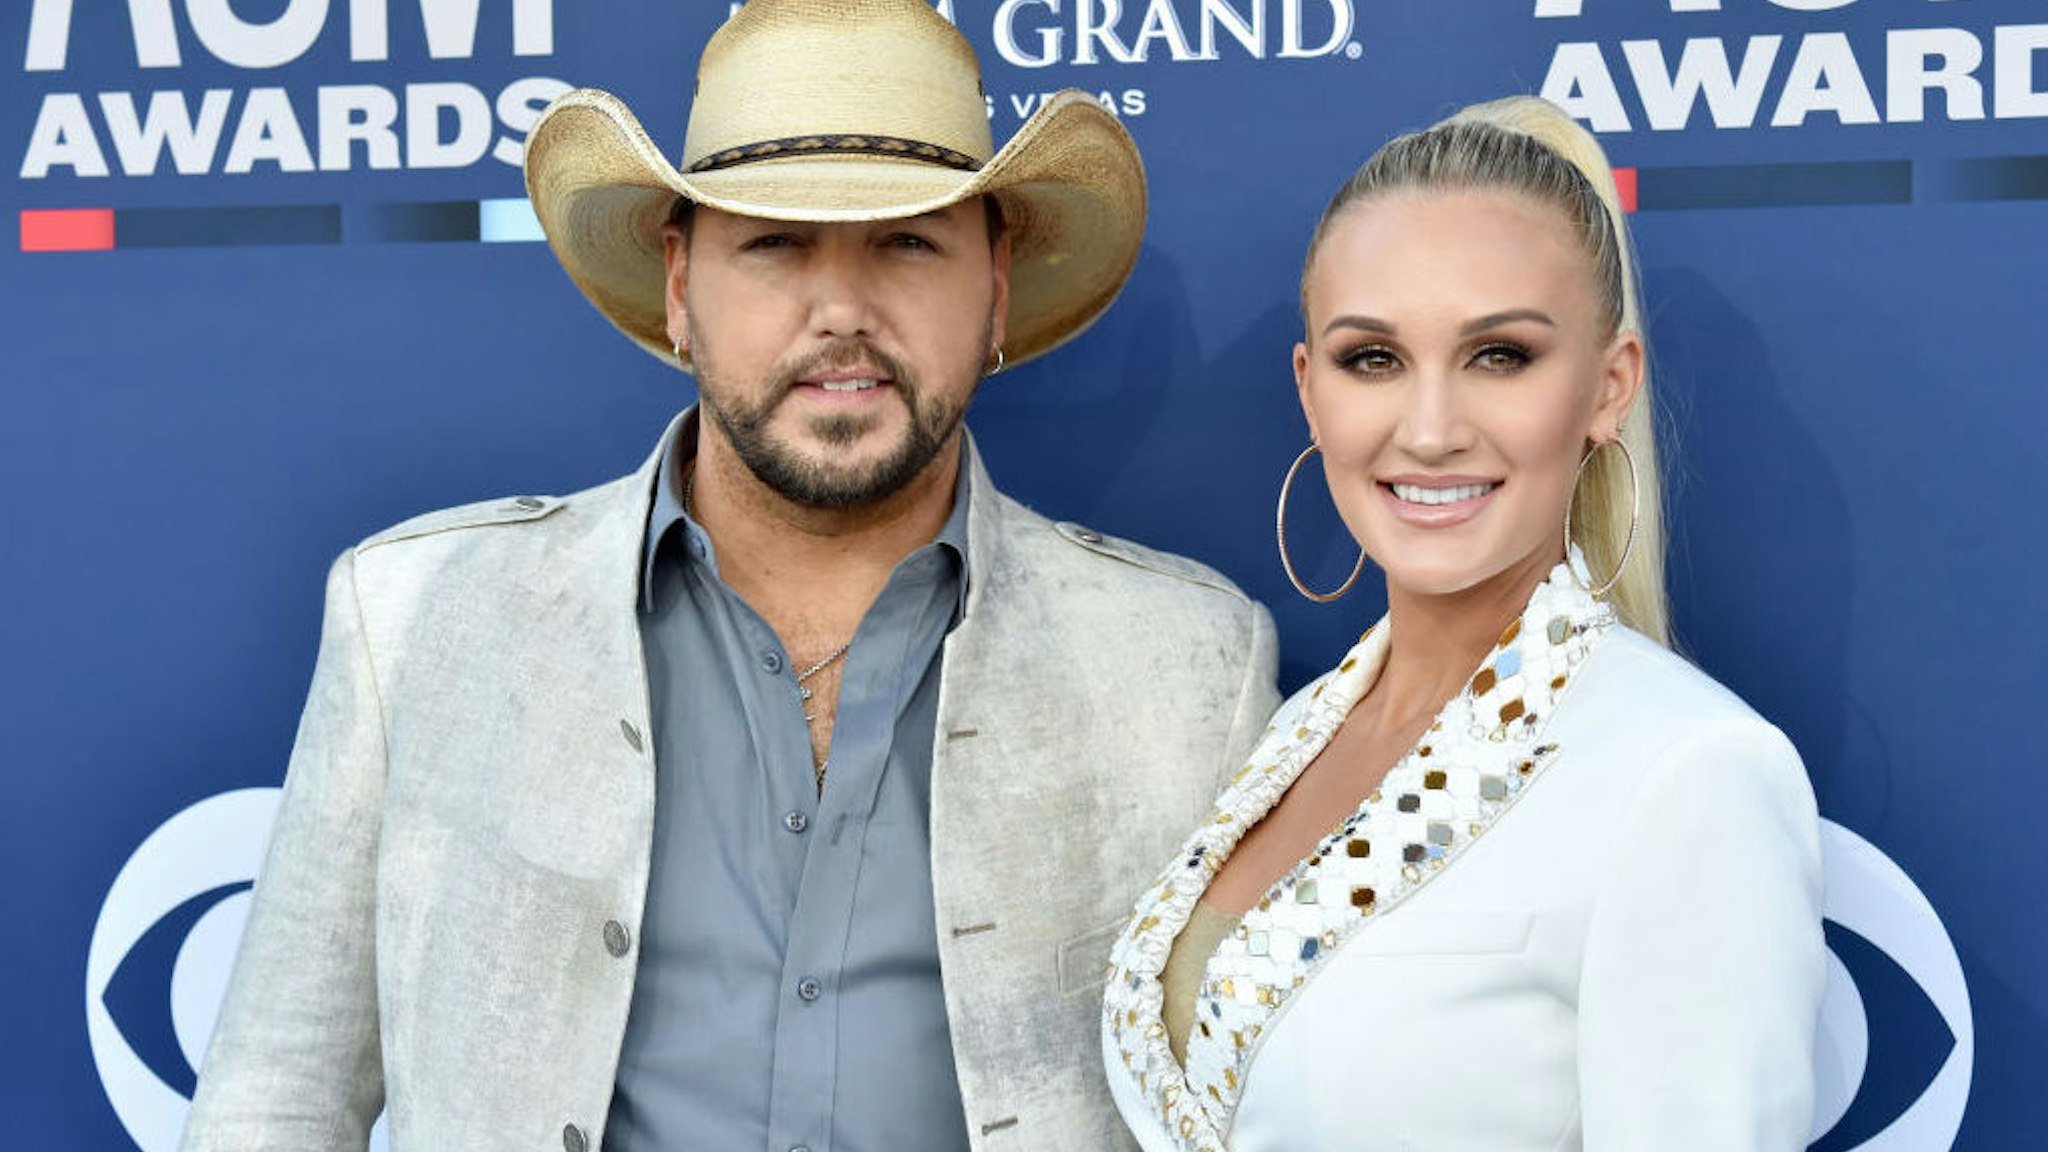 Jason Aldean and Brittany Aldean attends the 54th Academy Of Country Music Awards at MGM Grand Hotel & Casino on April 07, 2019 in Las Vegas, Nevada.